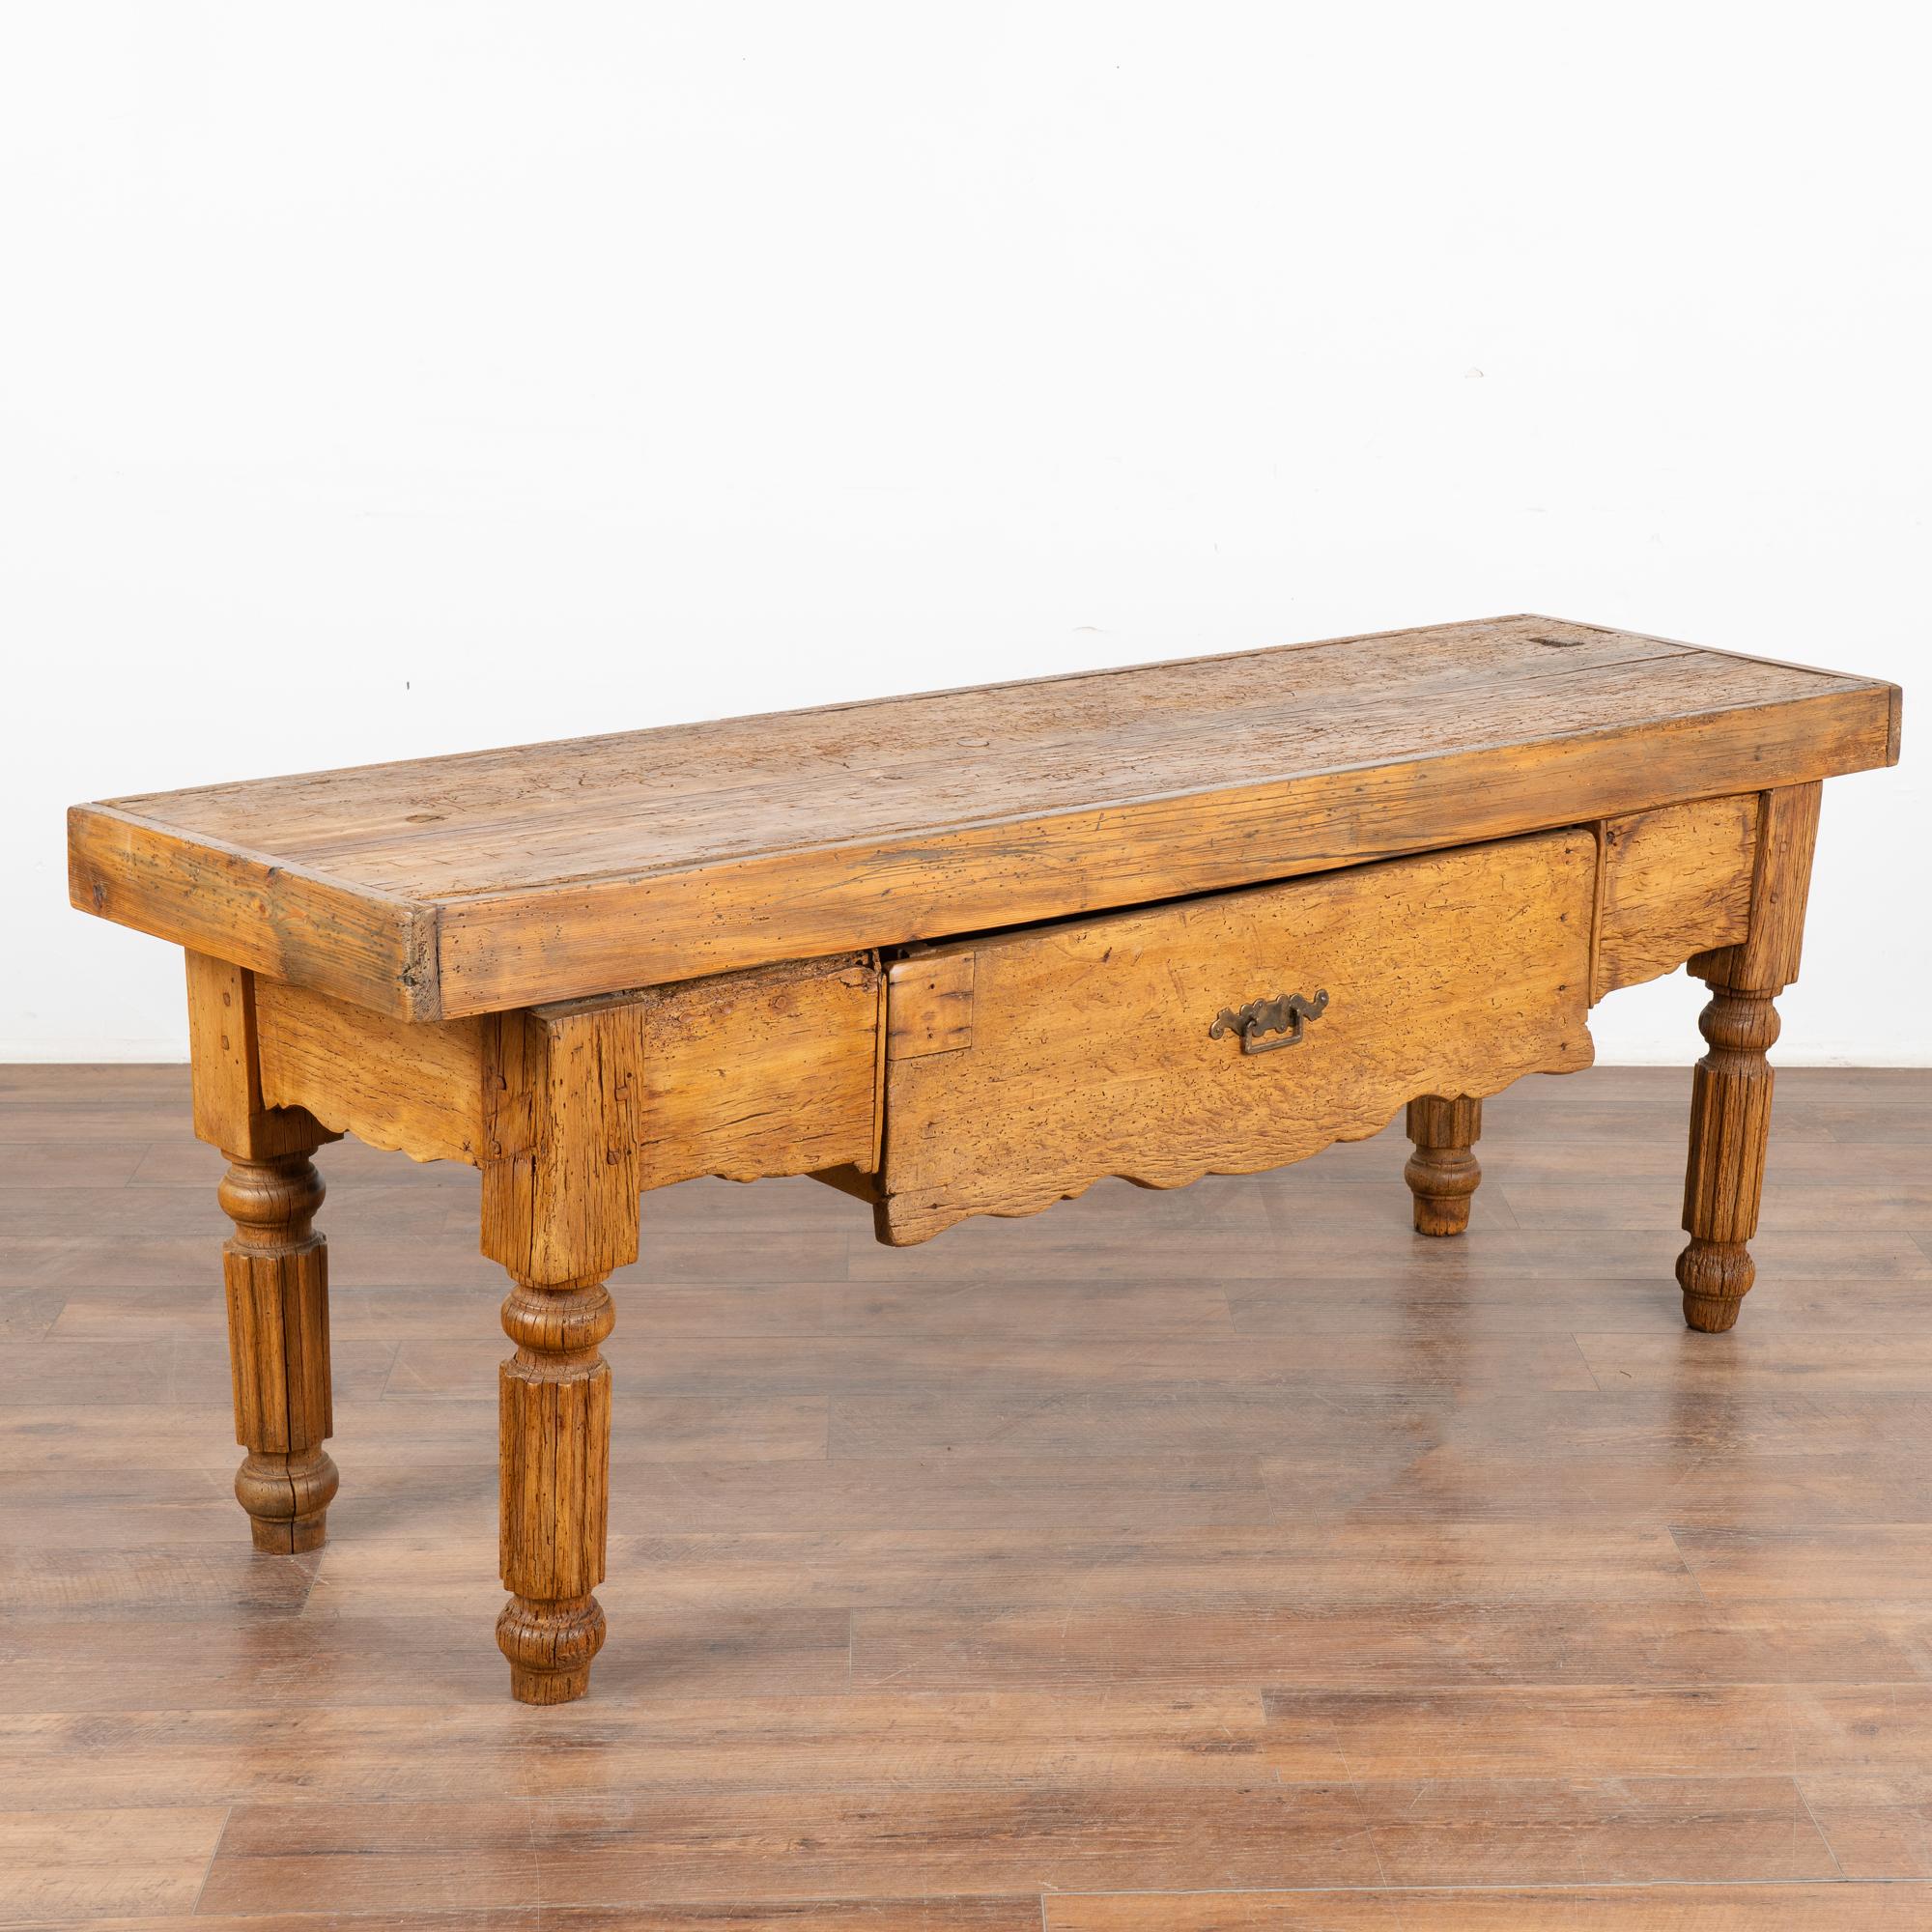 It is the incredible patina of the aged wood that creates the appeal in this French console table resting on turned legs.
The generations of use are revealed in every old knot, nick, crack, etc. all resulting in the deep patina of the 3